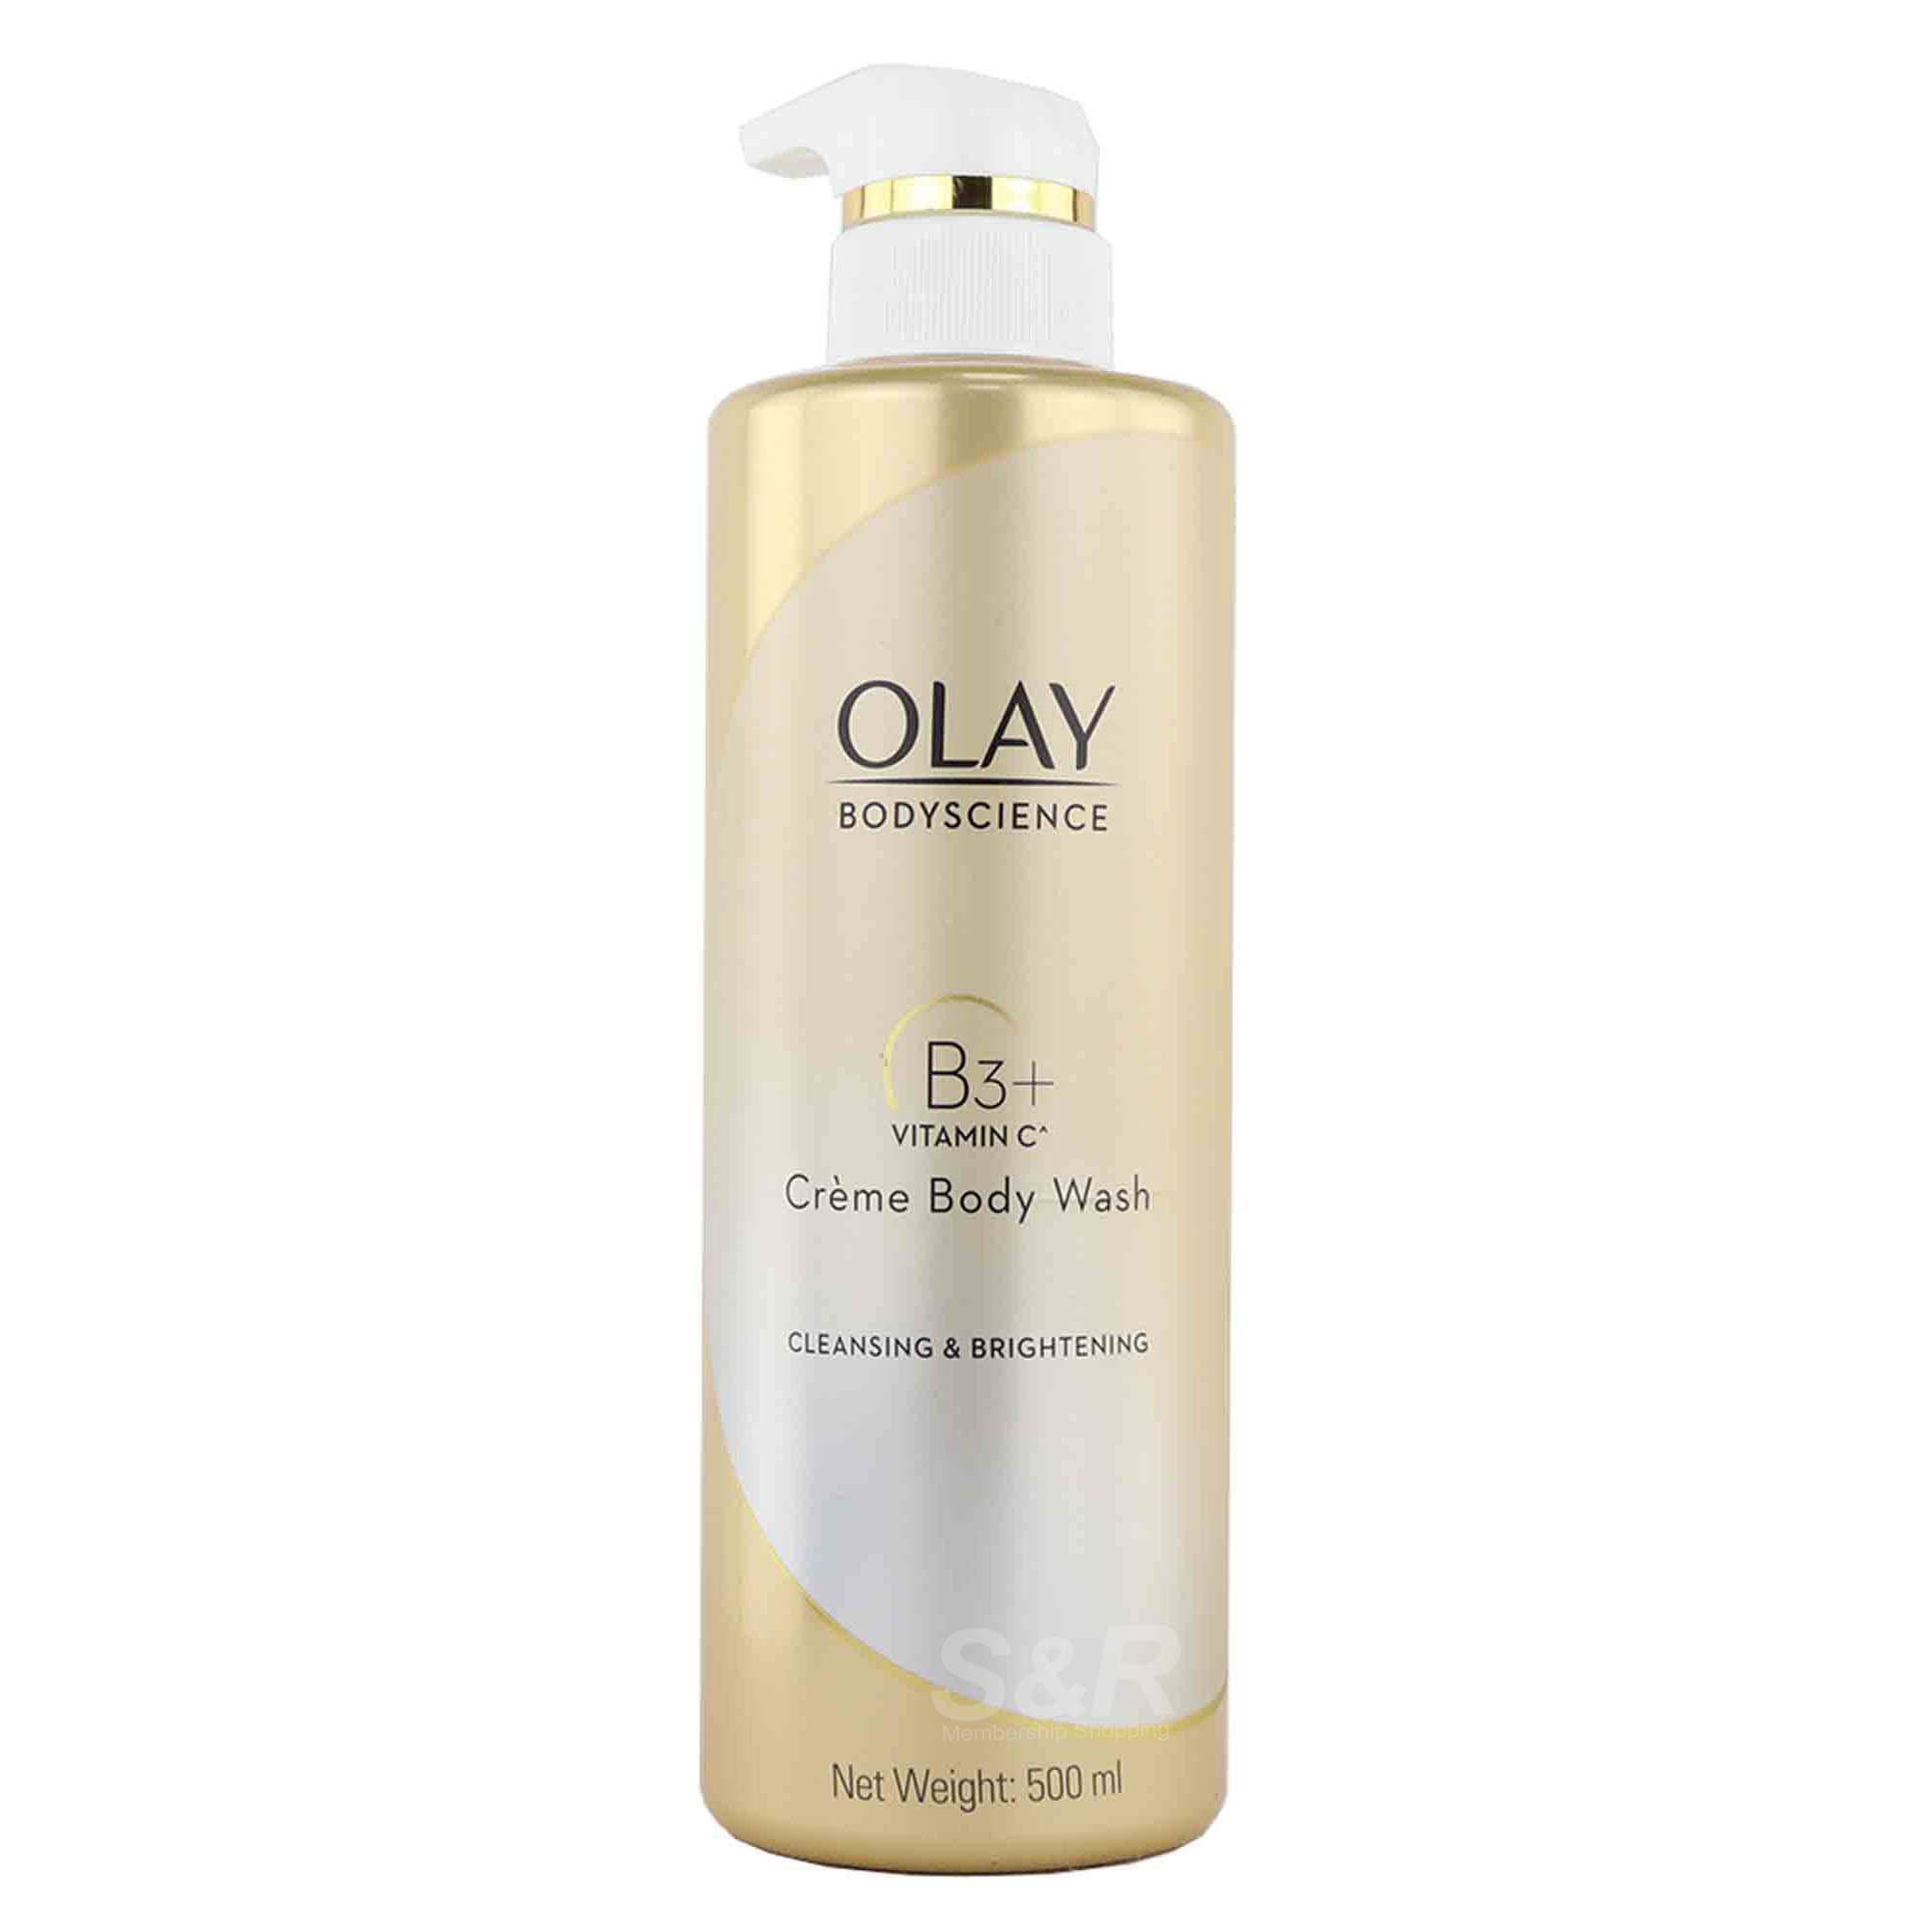 Olay Bodyscience Cleansing & Brightening Cremé Body Wash 500mL